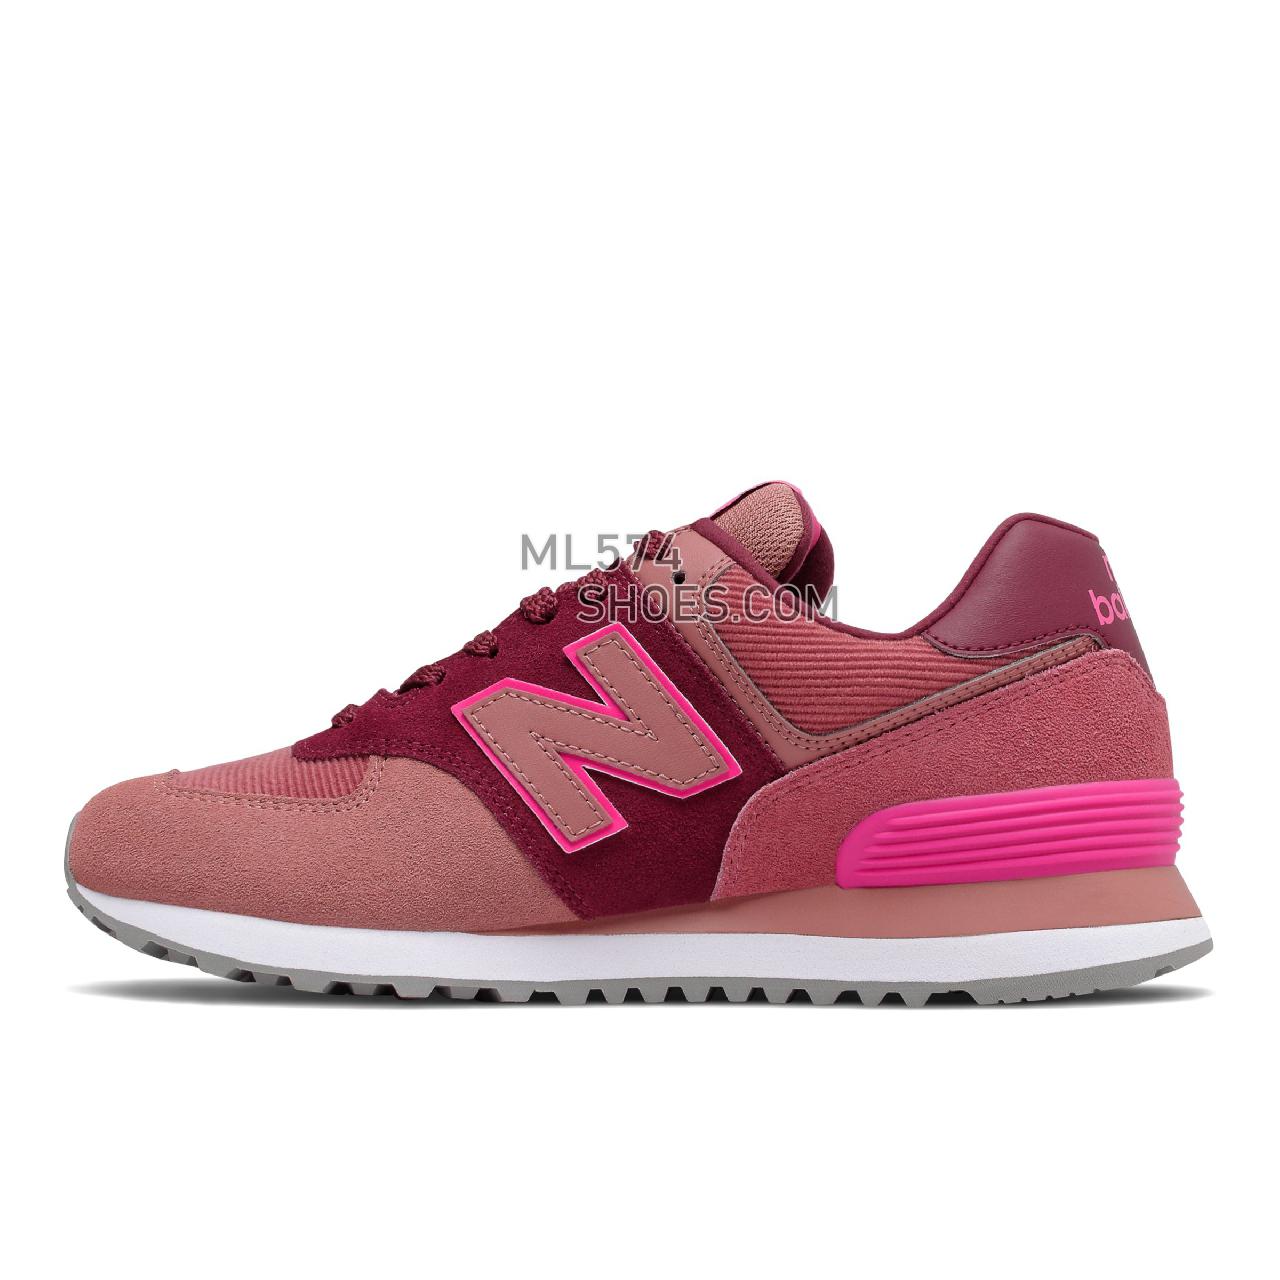 New Balance 574 - Women's Classic Sneakers - Garnet with Washed Henna - WL574WH2